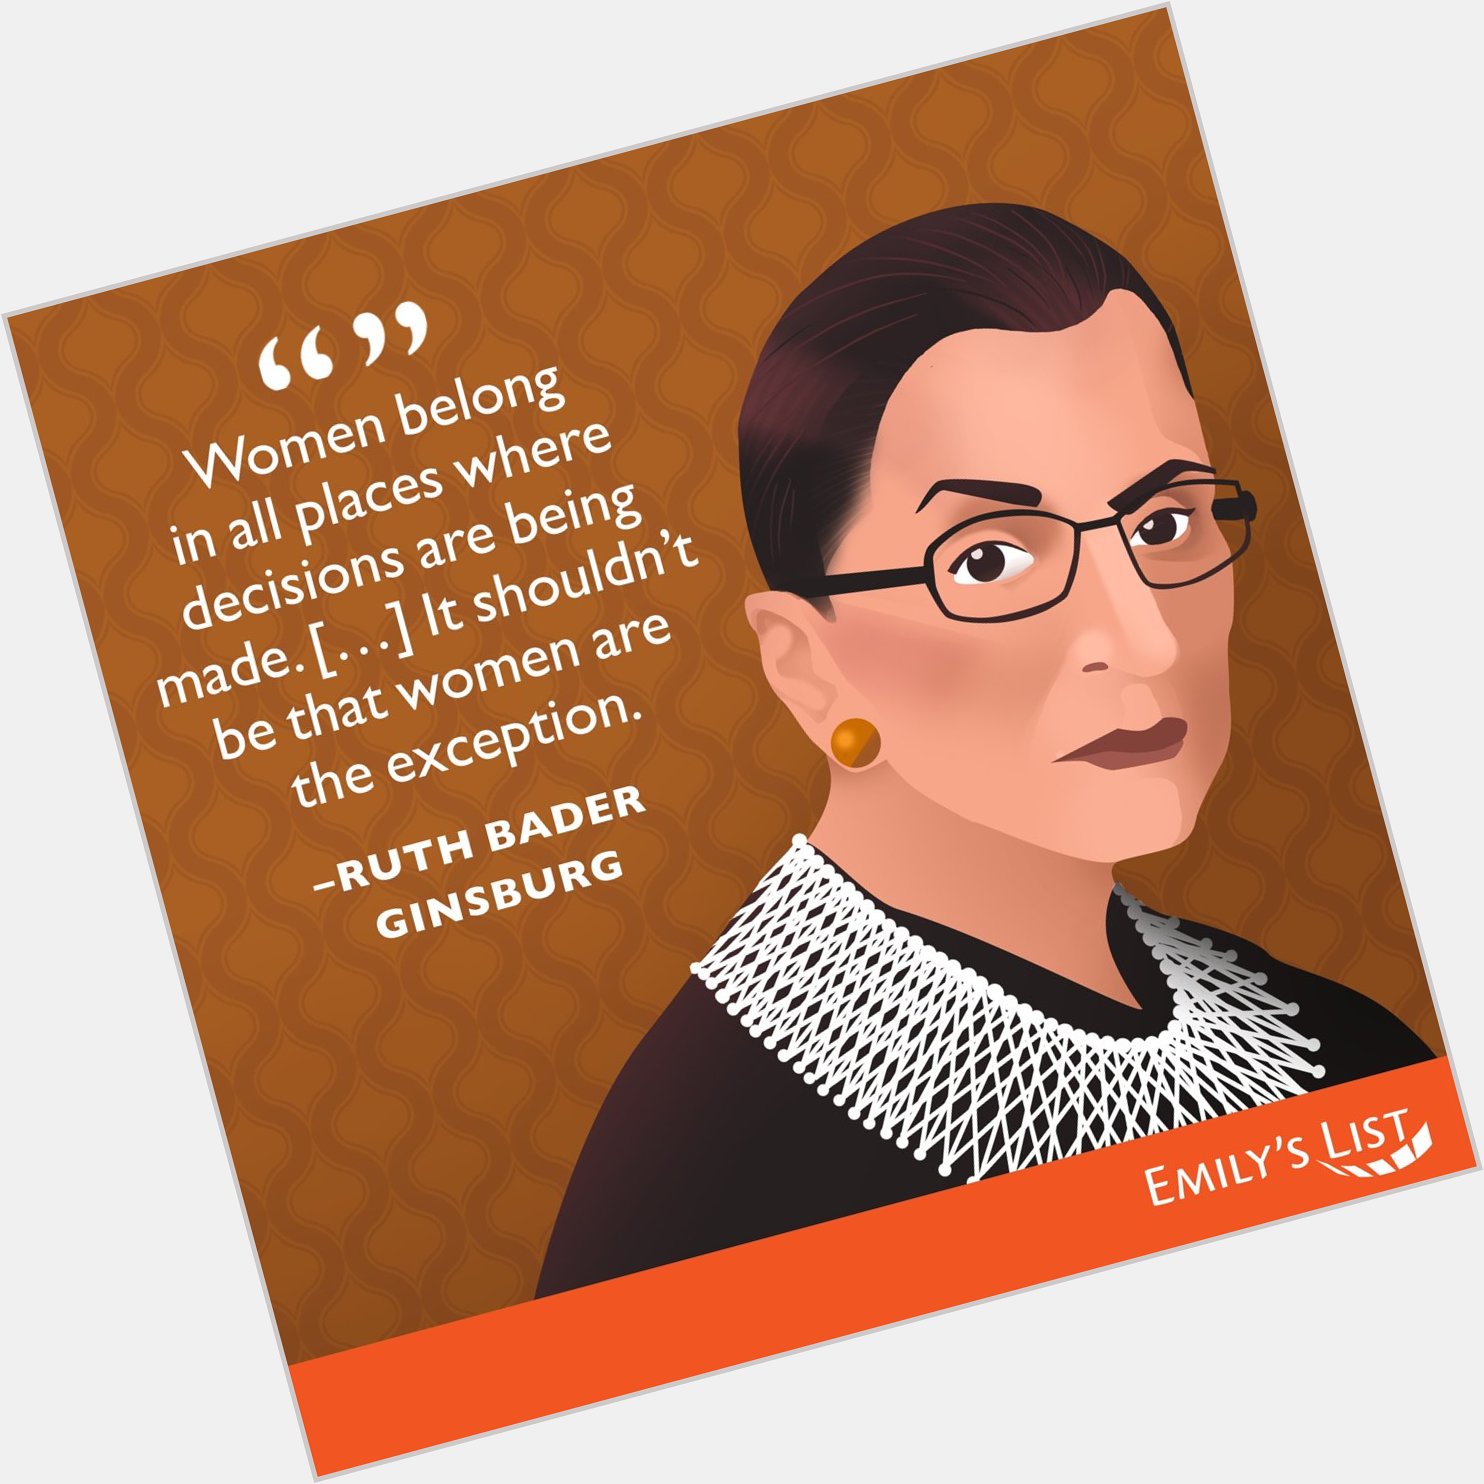 Happy birthday, Ruth Bader Ginsburg! We\re fighting to make sure women have a seat at the table. 